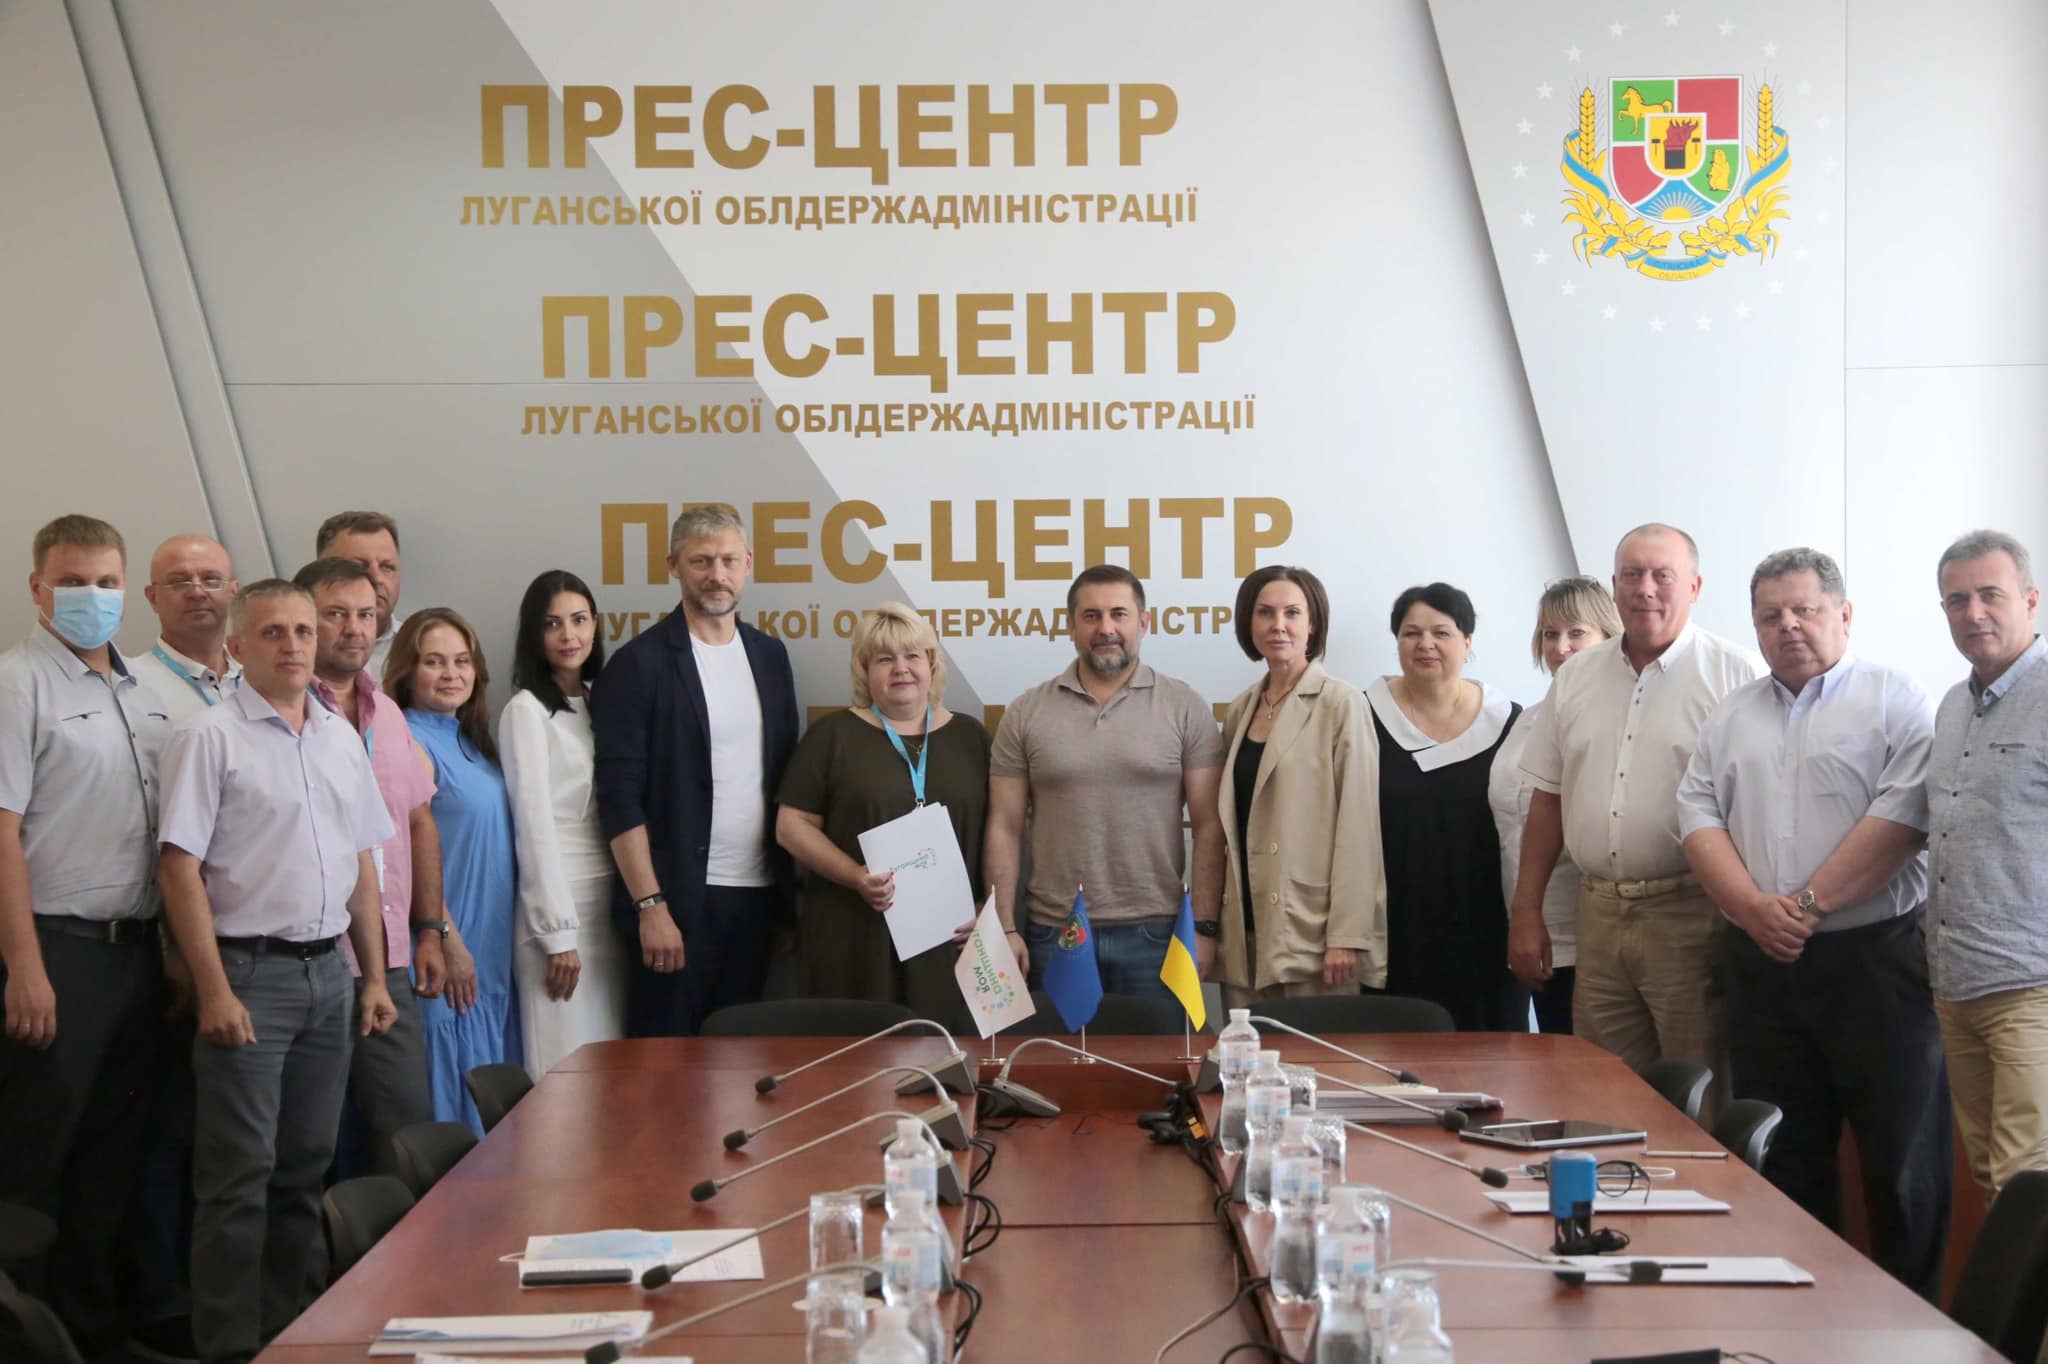 13 medical facilities will be renovated within the USIF VIII project